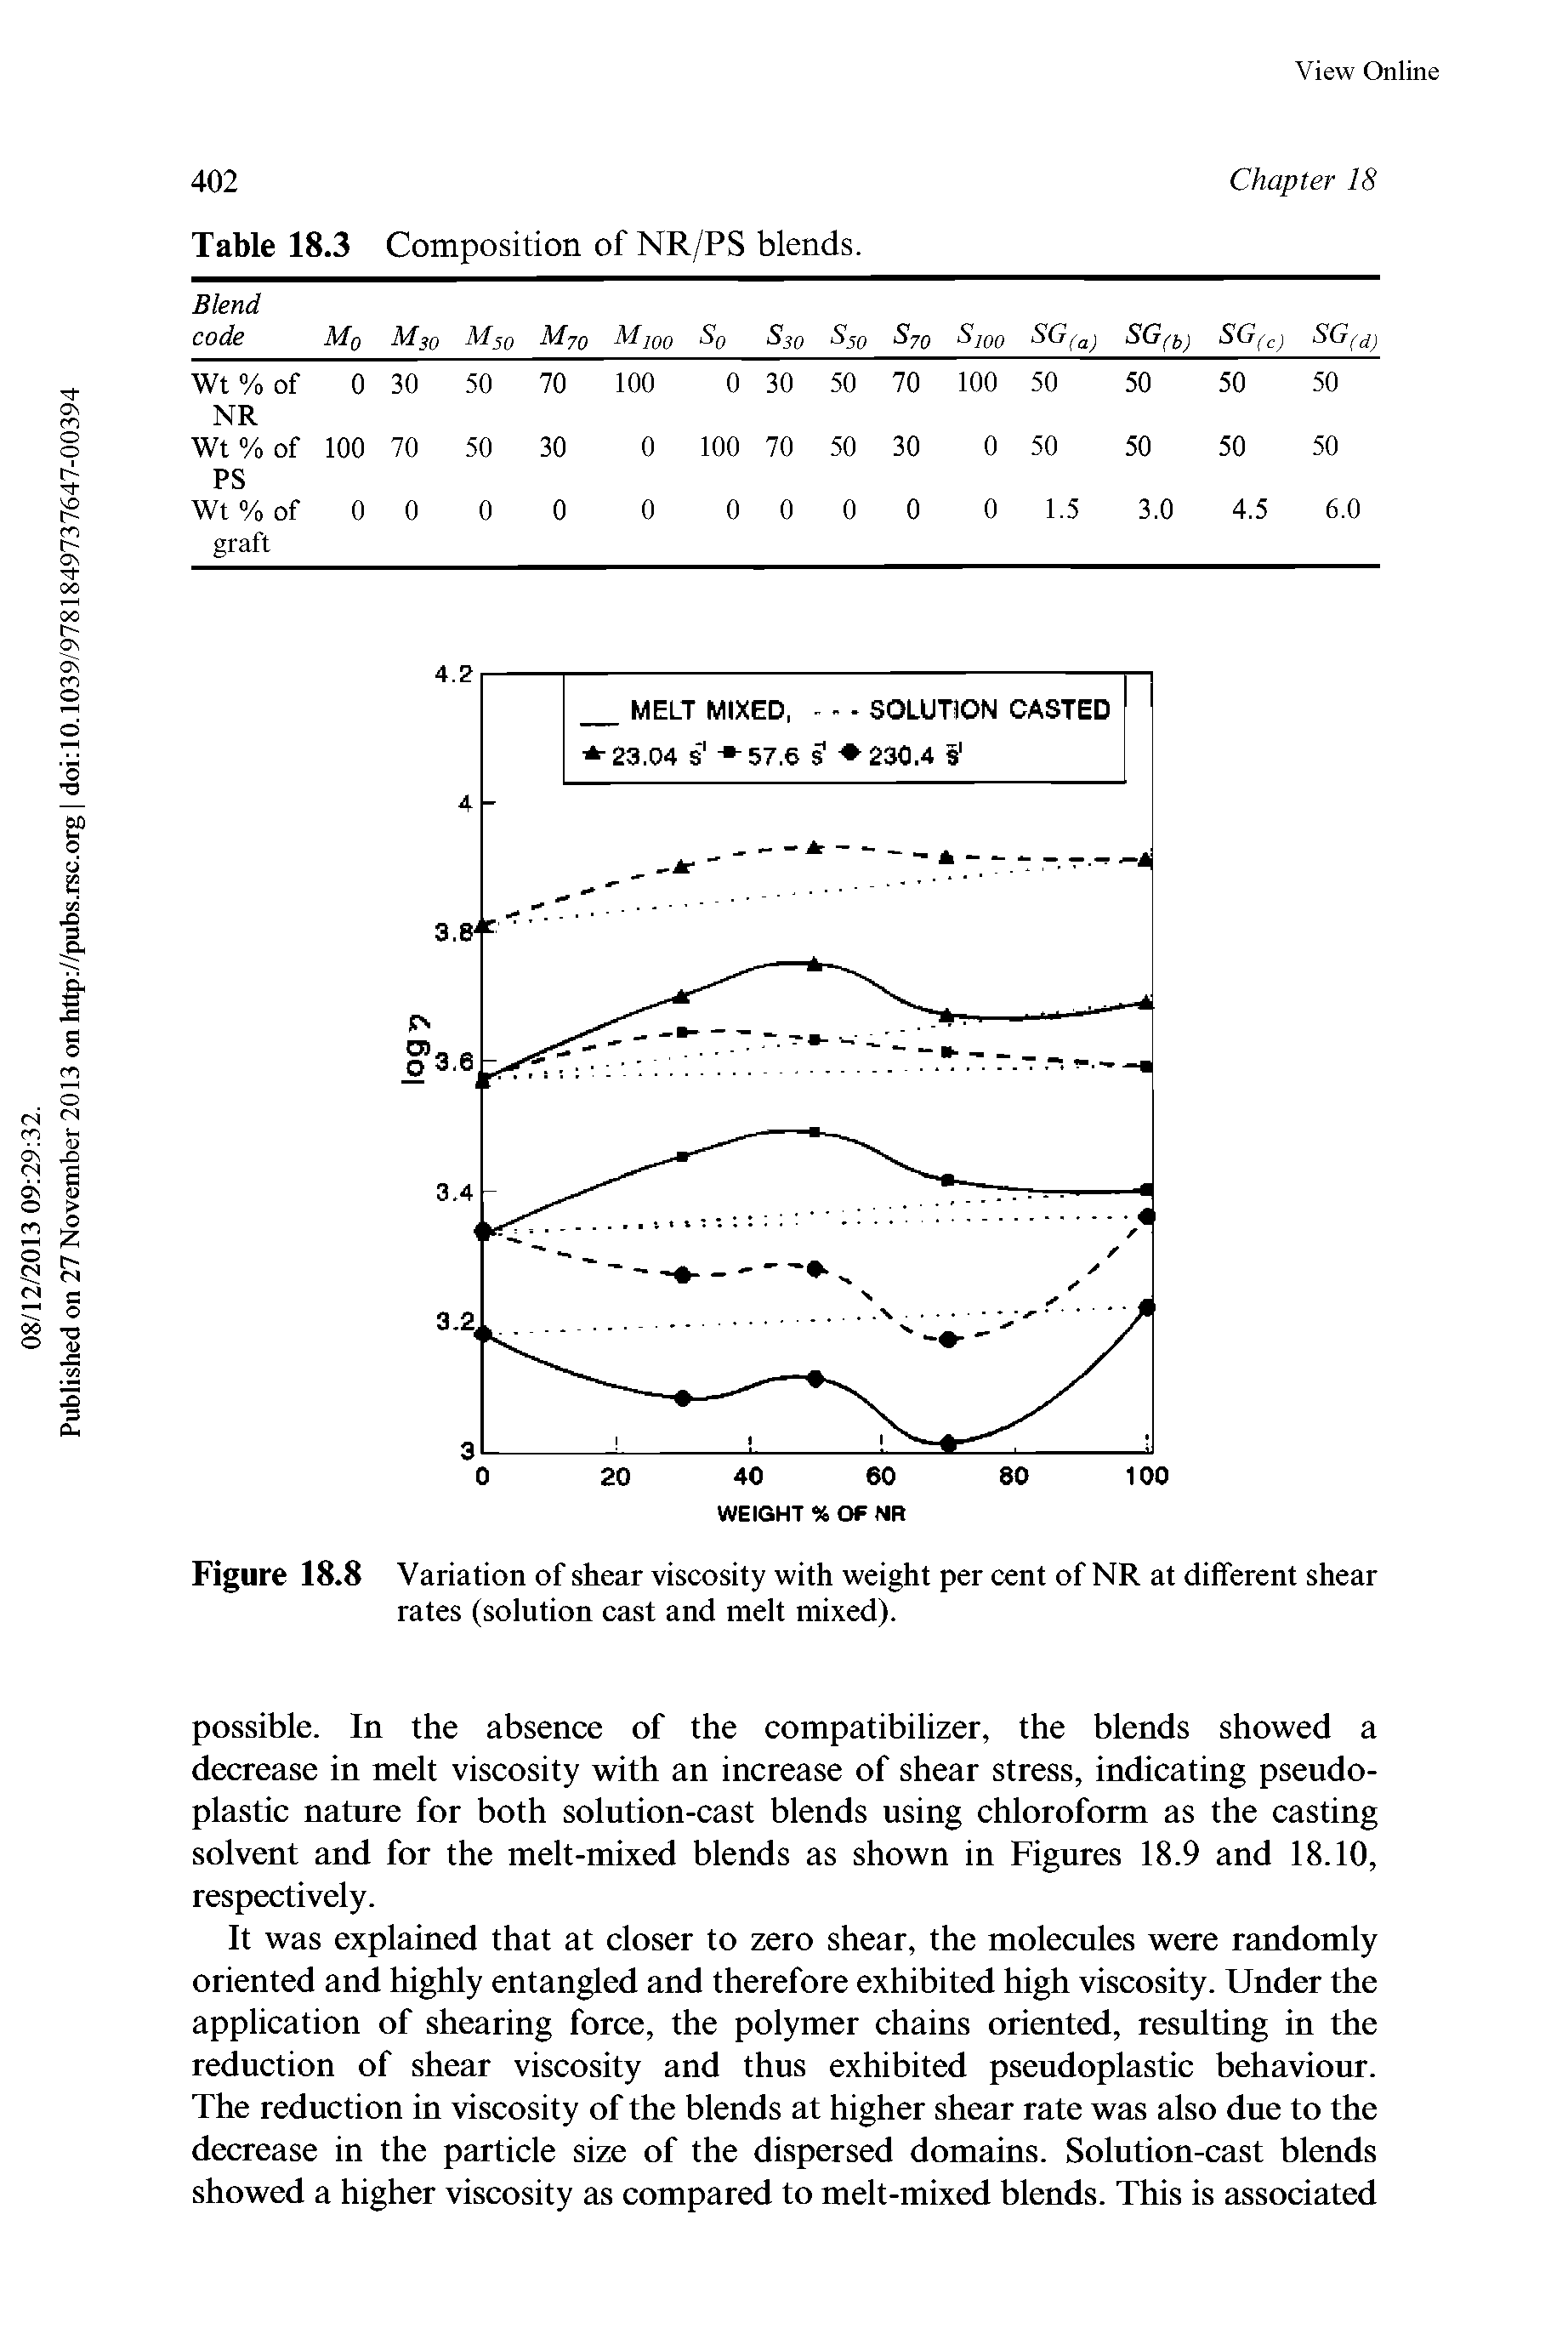 Figure 18.8 Variation of shear viscosity with weight per cent of NR at different shear rates (solution cast and melt mixed).